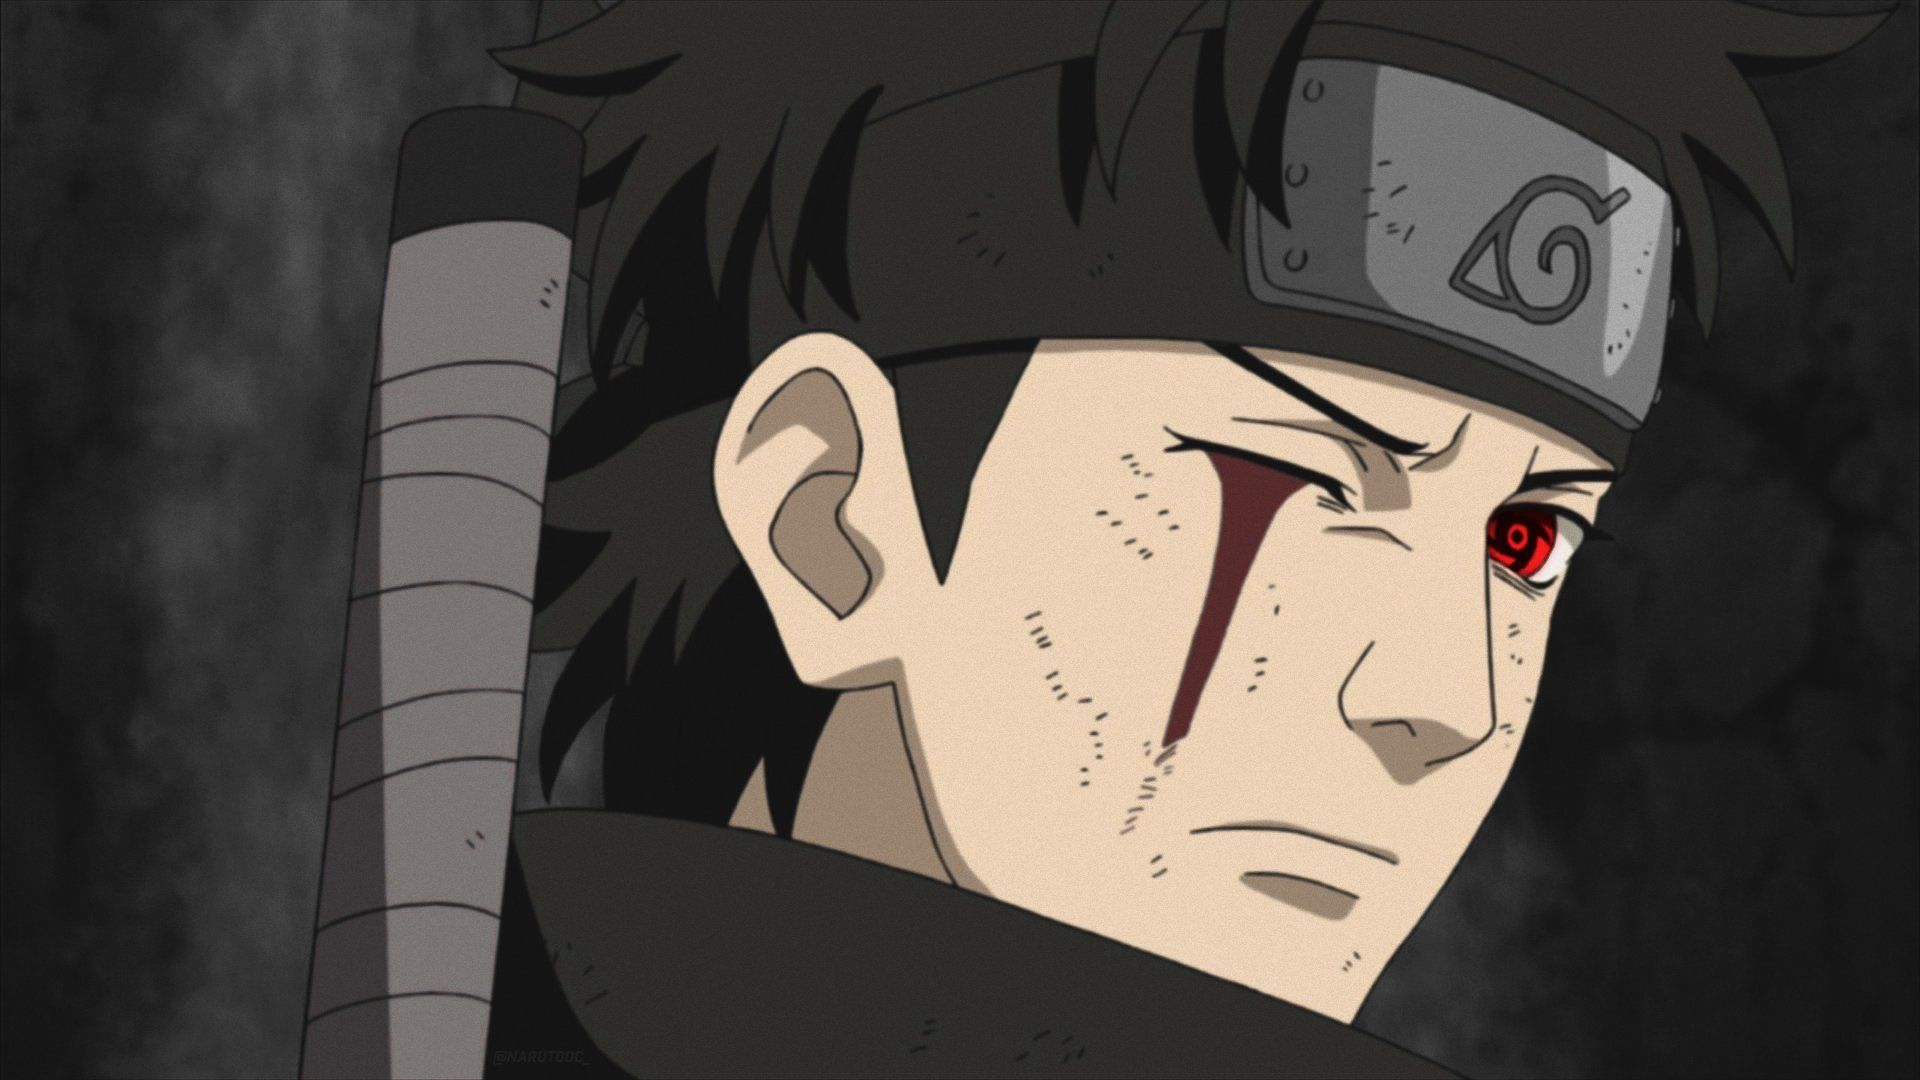 How Did Shisui Get His Mangekyou Sharingan? Complete Story Arc